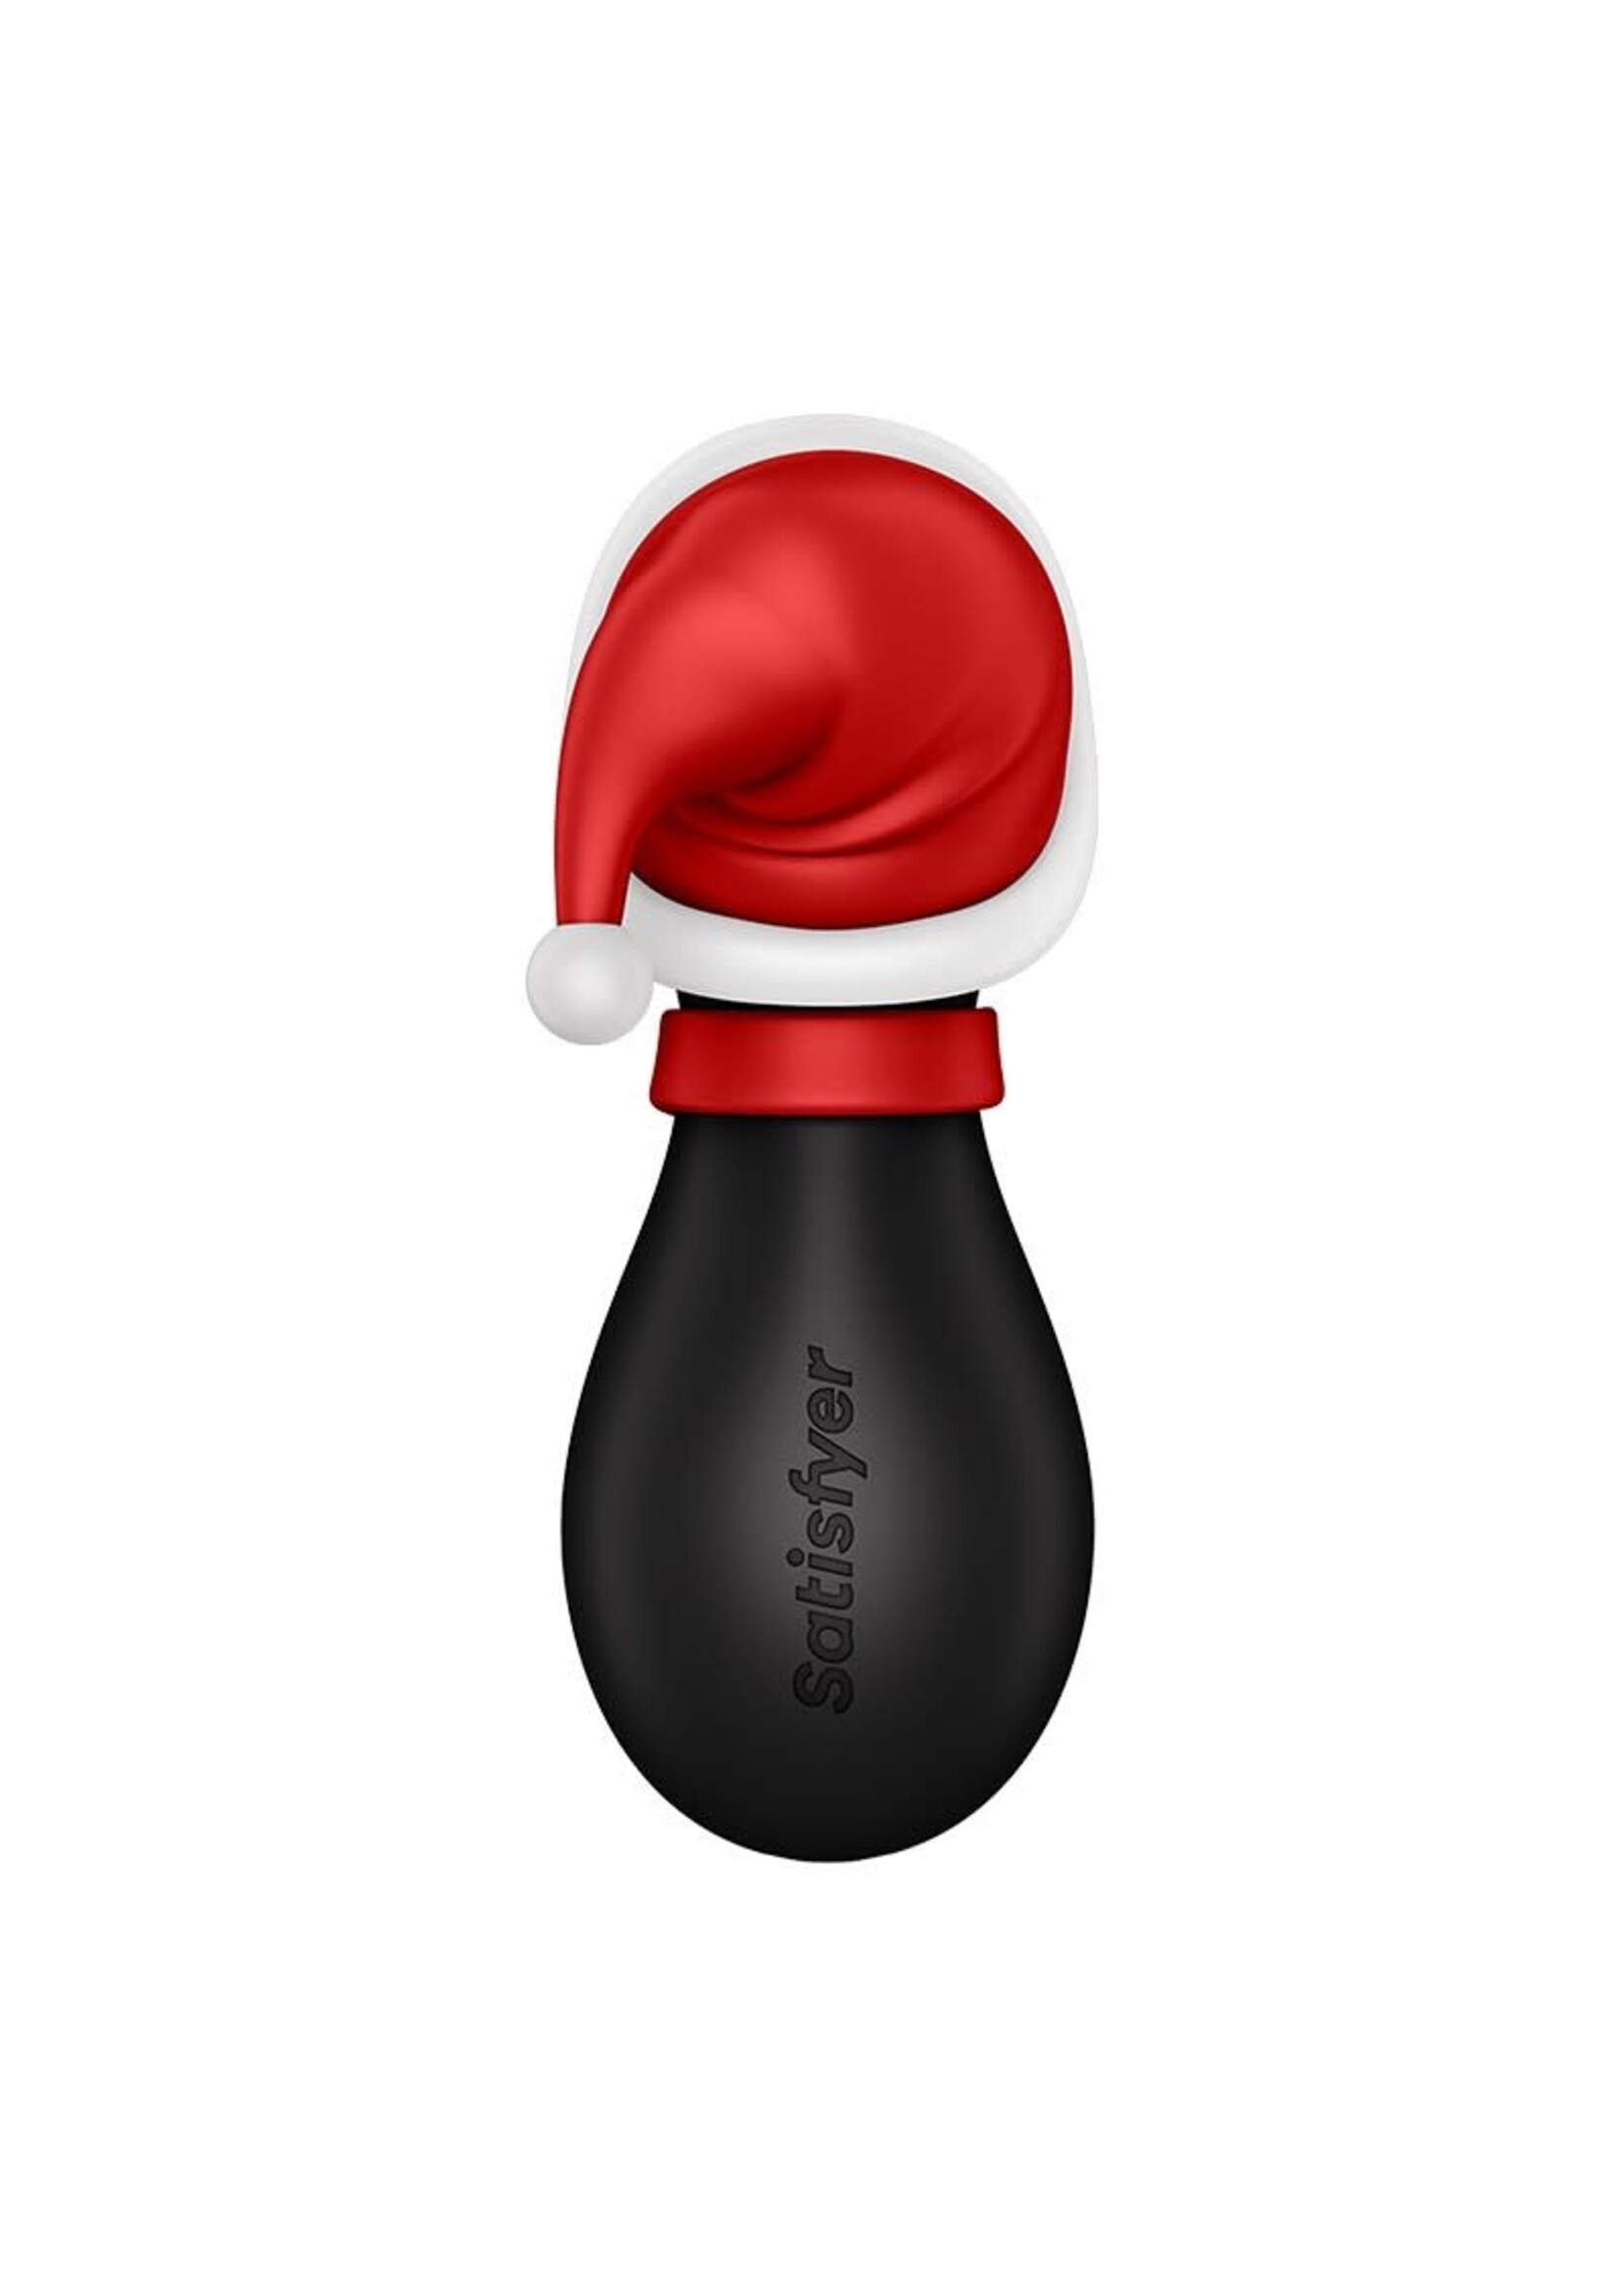 Satisfyer Pinguin holiday edition